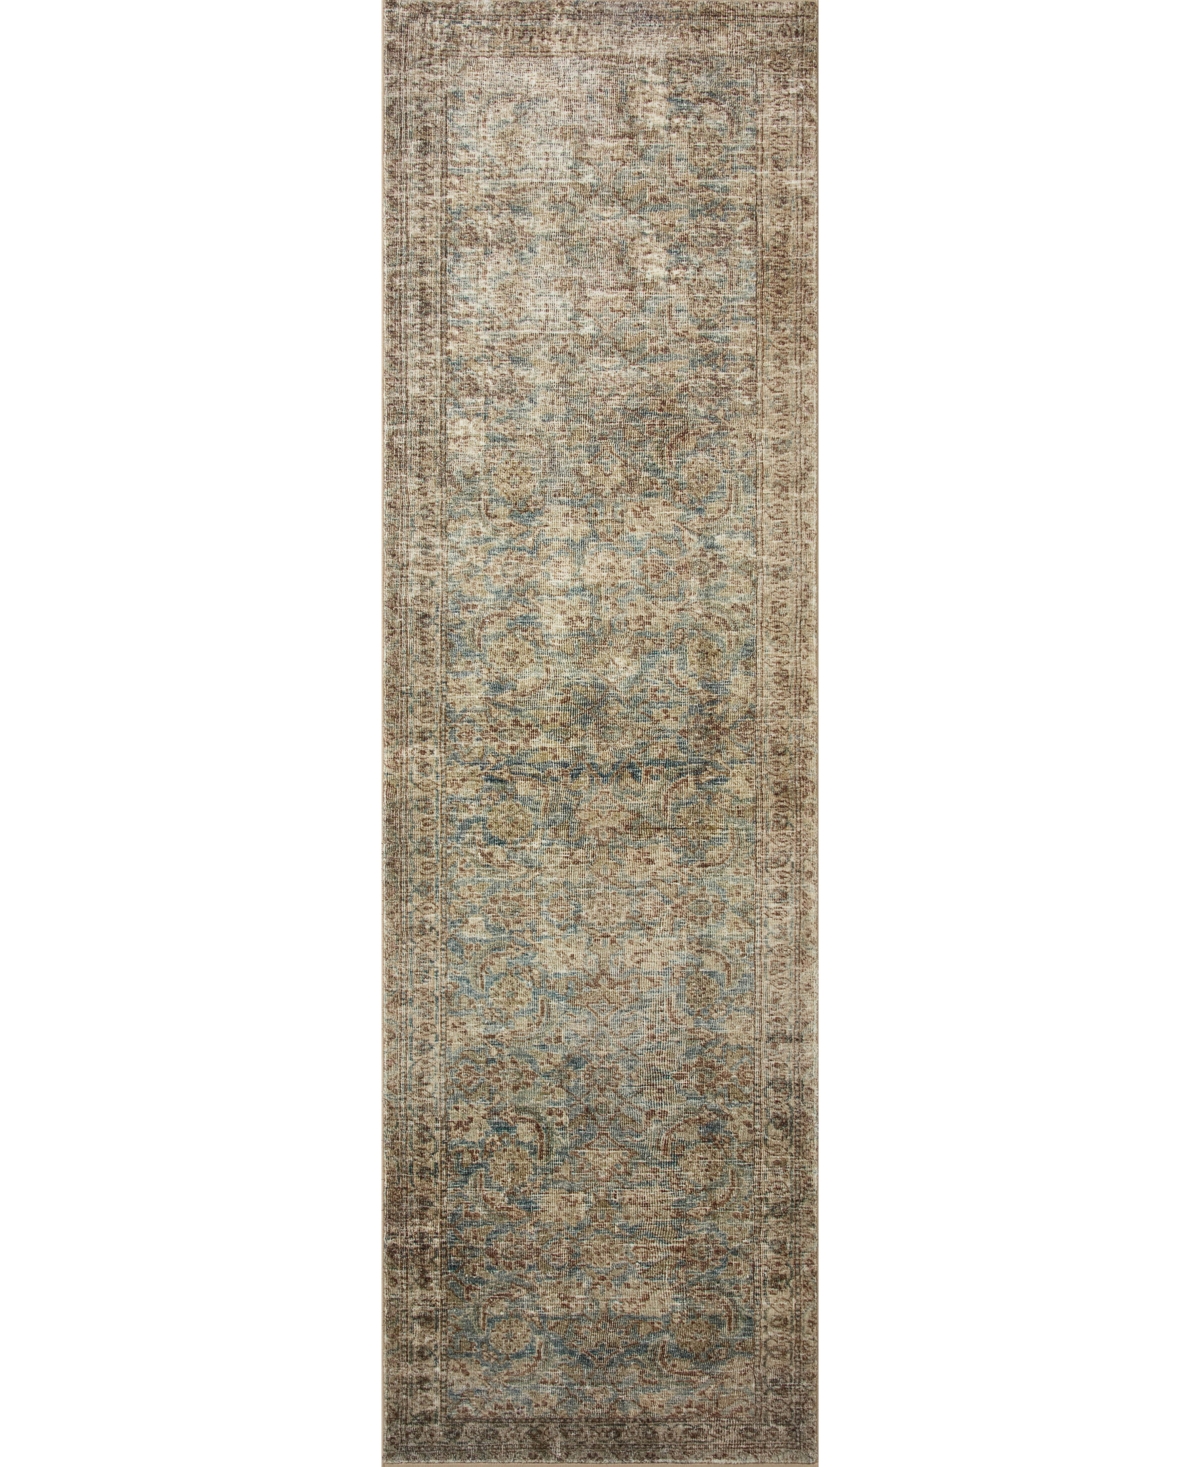 Amber Lewis X Loloi Morgan Mog-04 2'3" X 7'6" Runner Area Rug In Turquoise